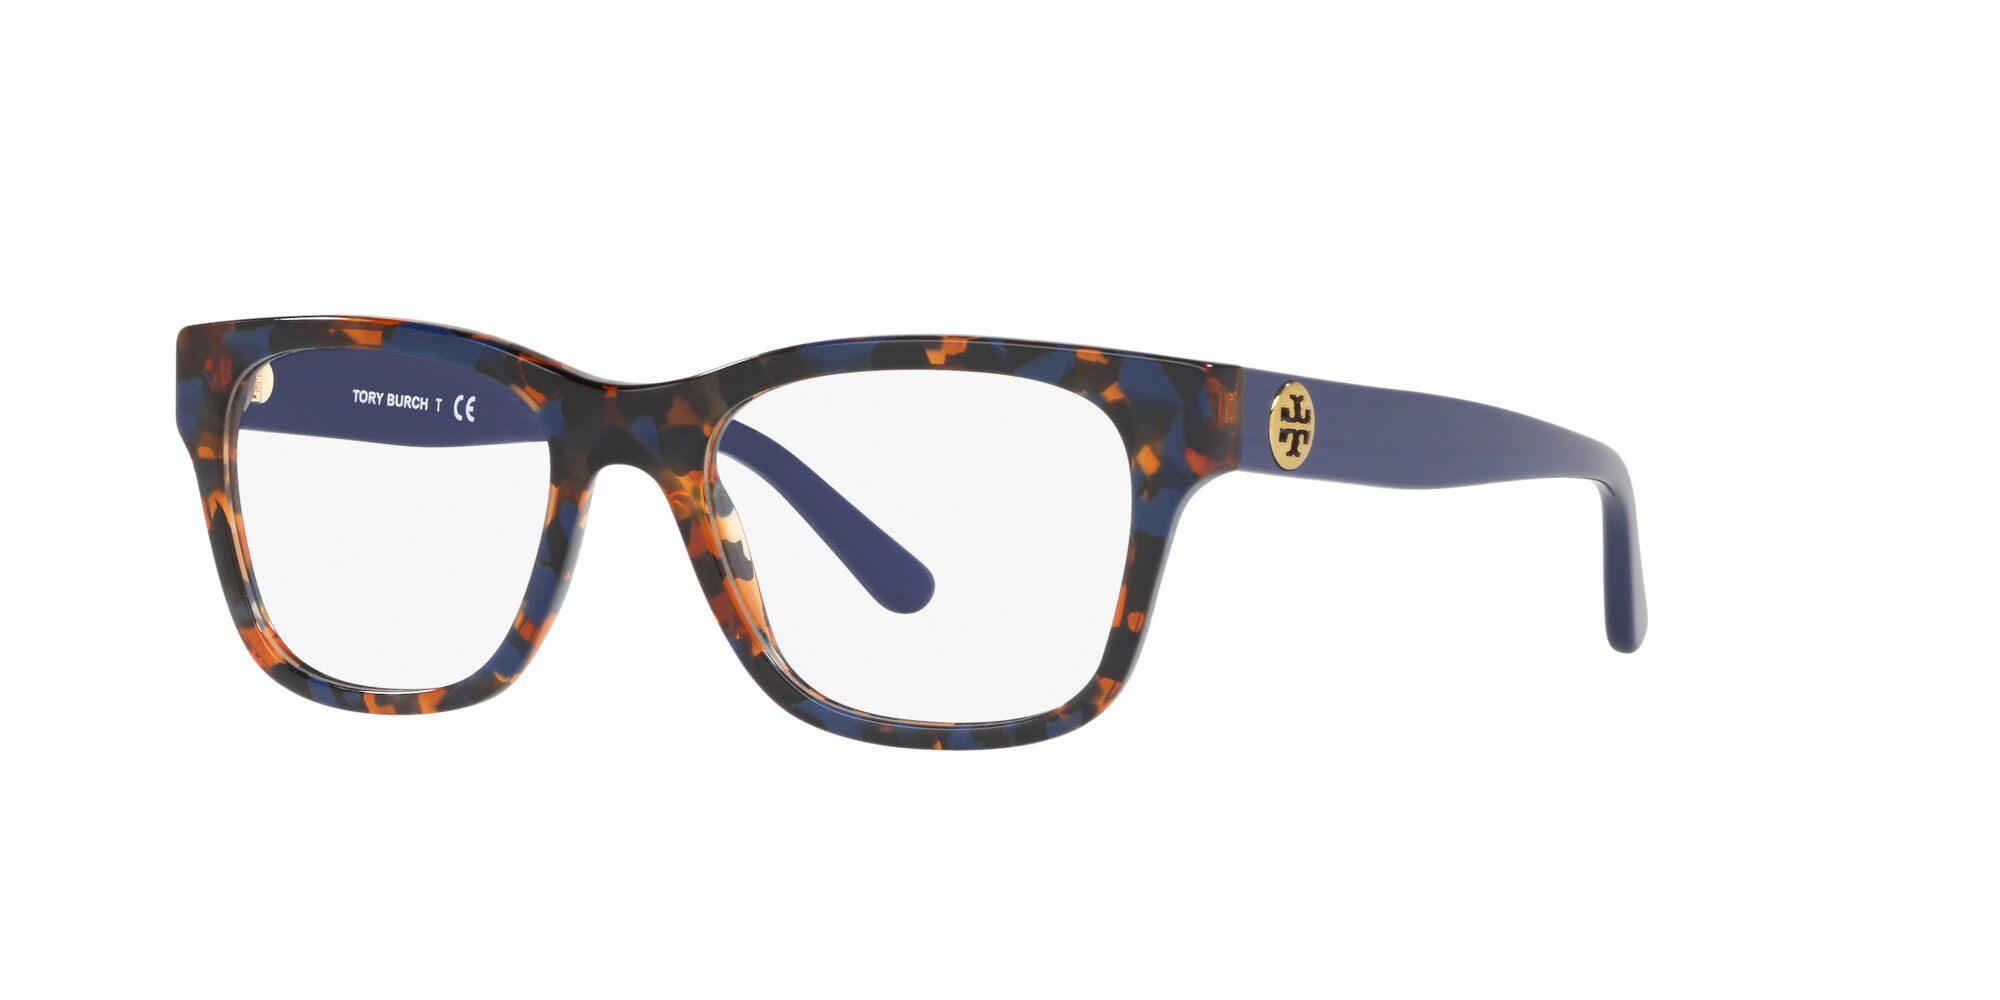 Angle_Left01 Tory Burch 0TY2098 1757 Brille Blau